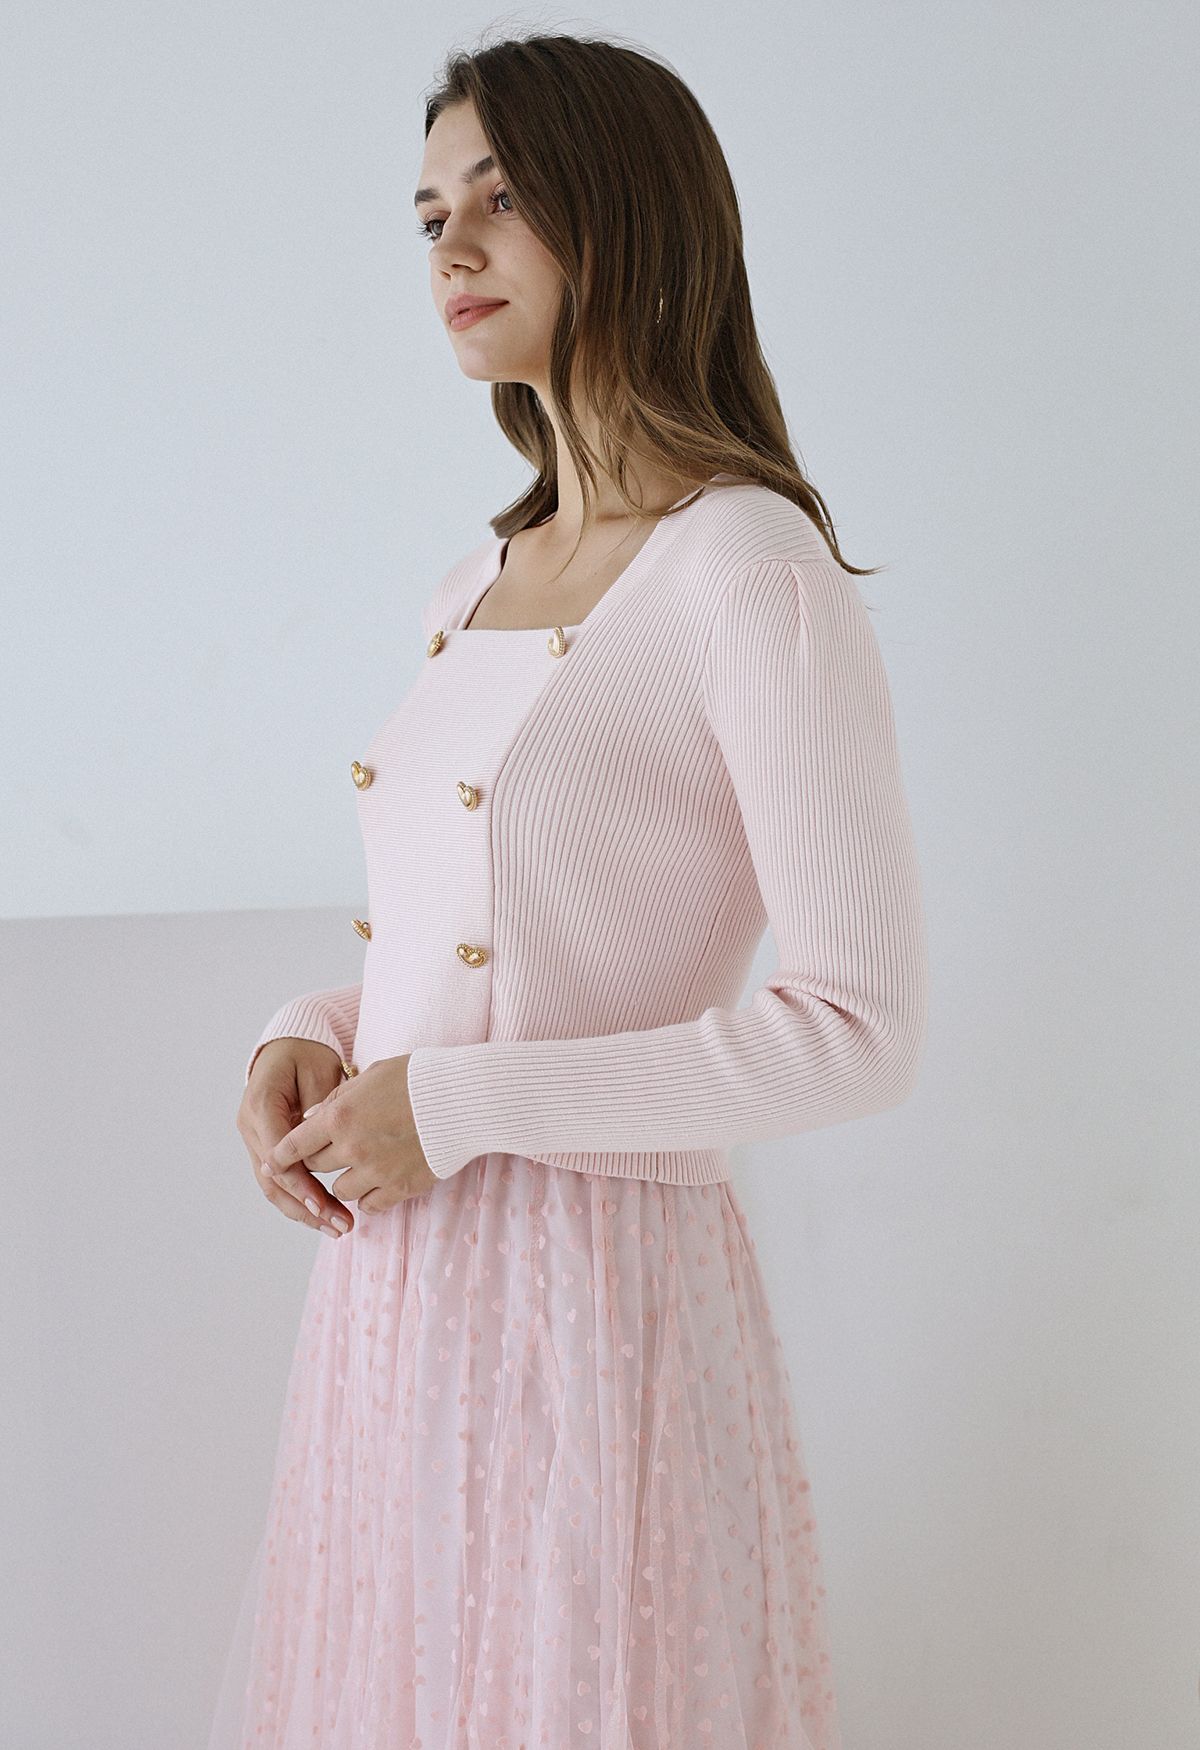 Heart-Shape Buttons Square Neck Knit Top in Light Pink